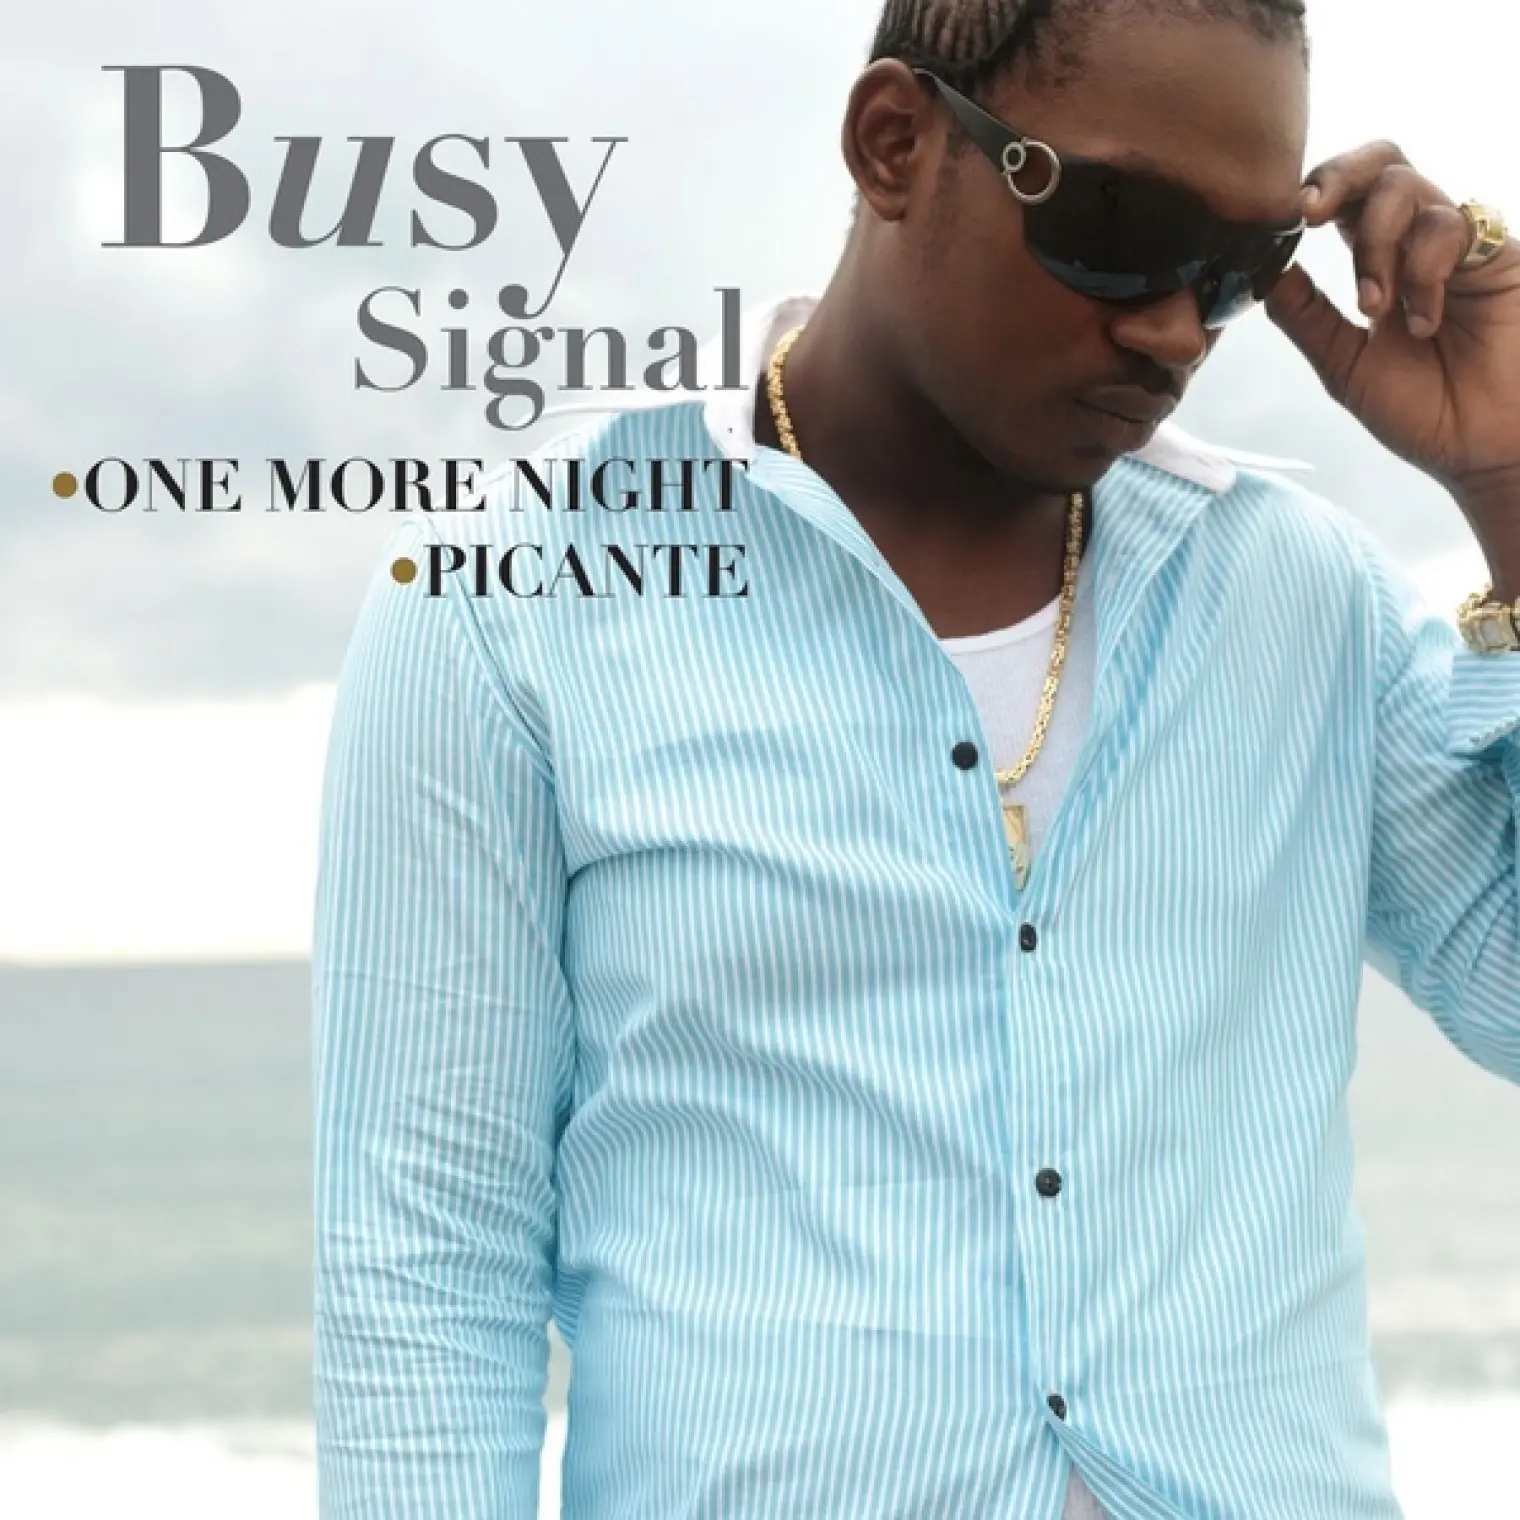 One More Night/ Picante [digital single] -  Busy Signal 